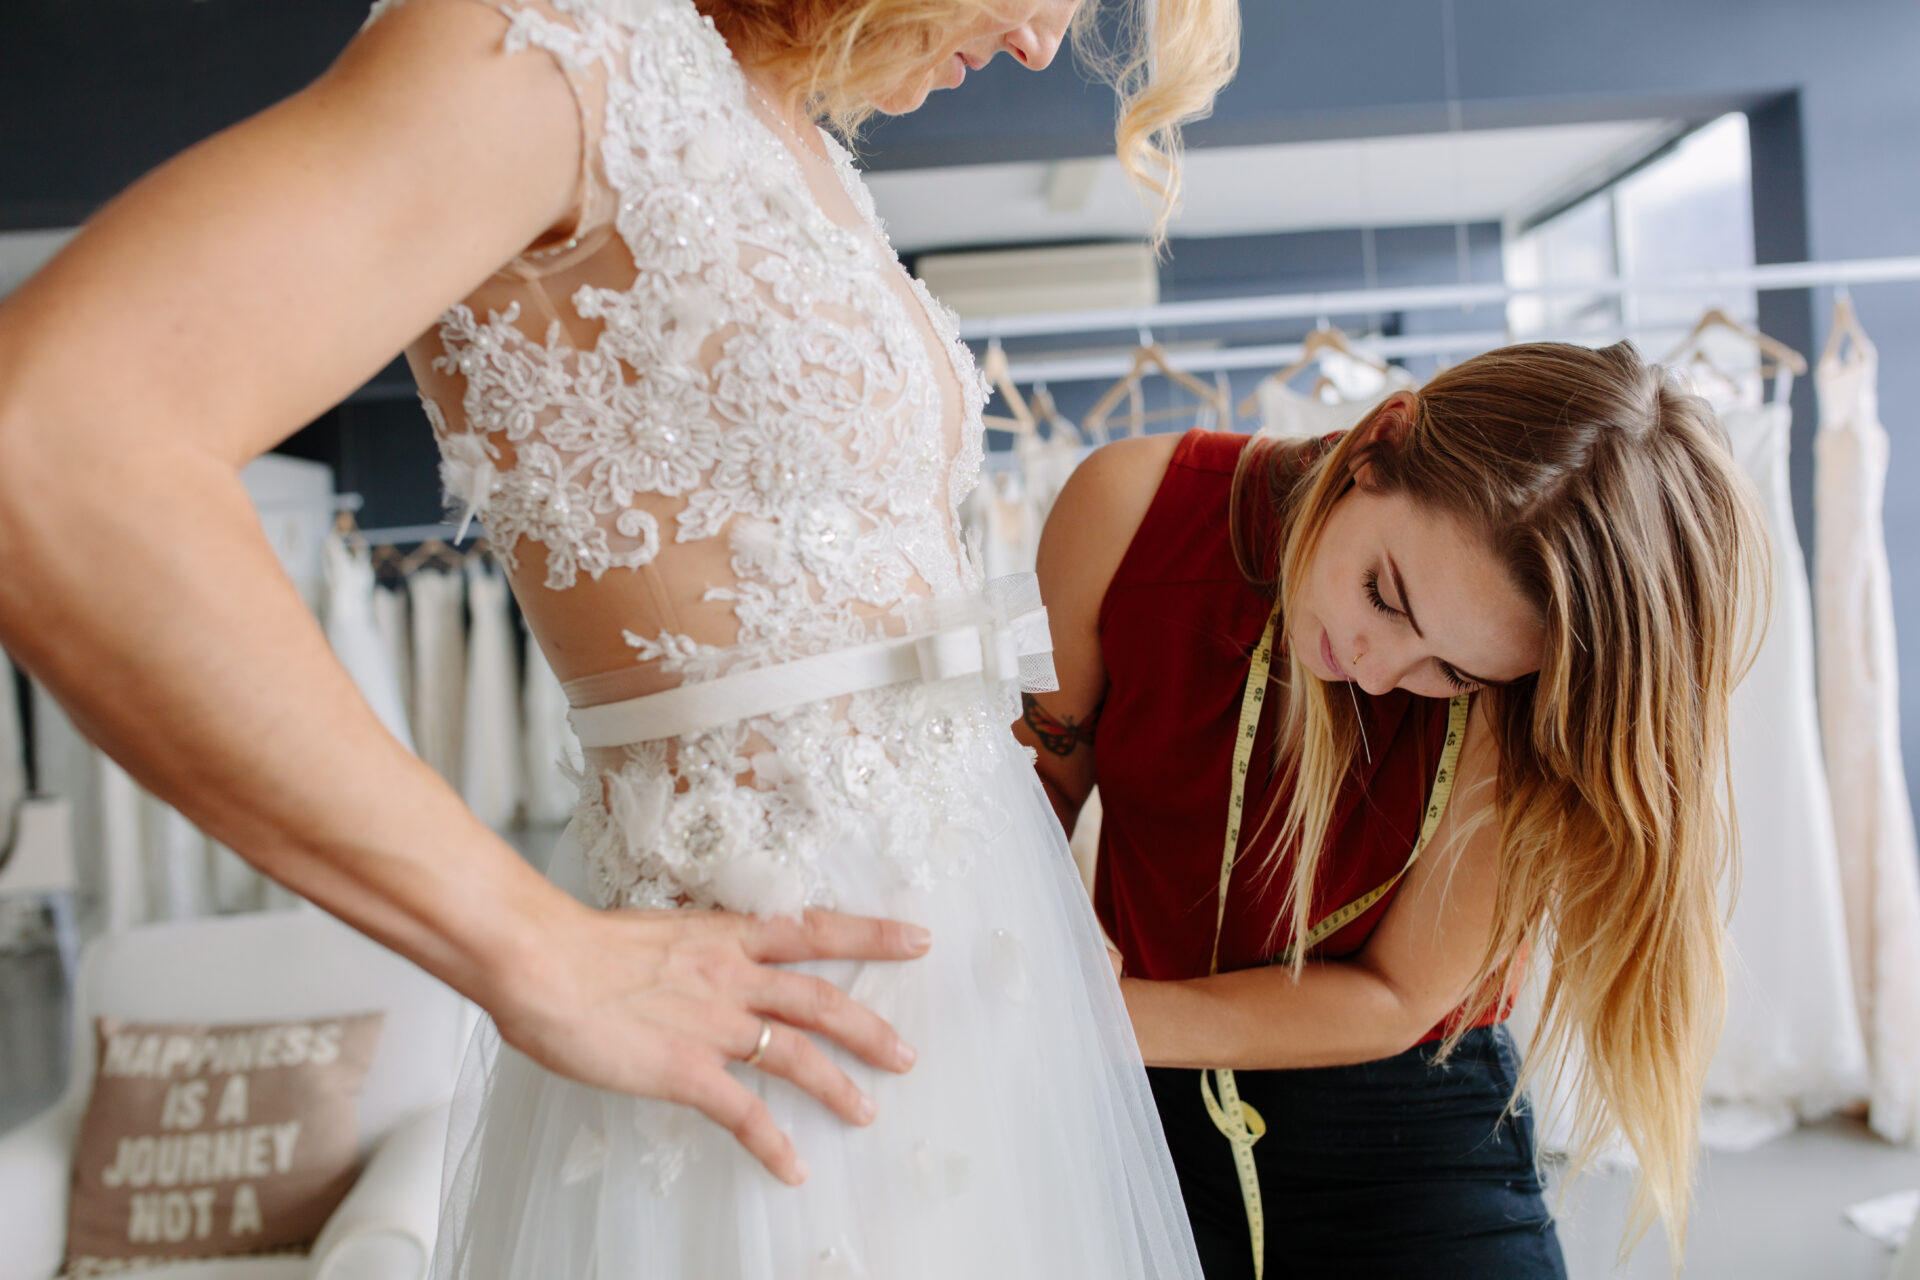 Skillful dress designer fitting wedding gown to woman in her boutique. Woman making adjustments to bridal gown in fashion designer studio.